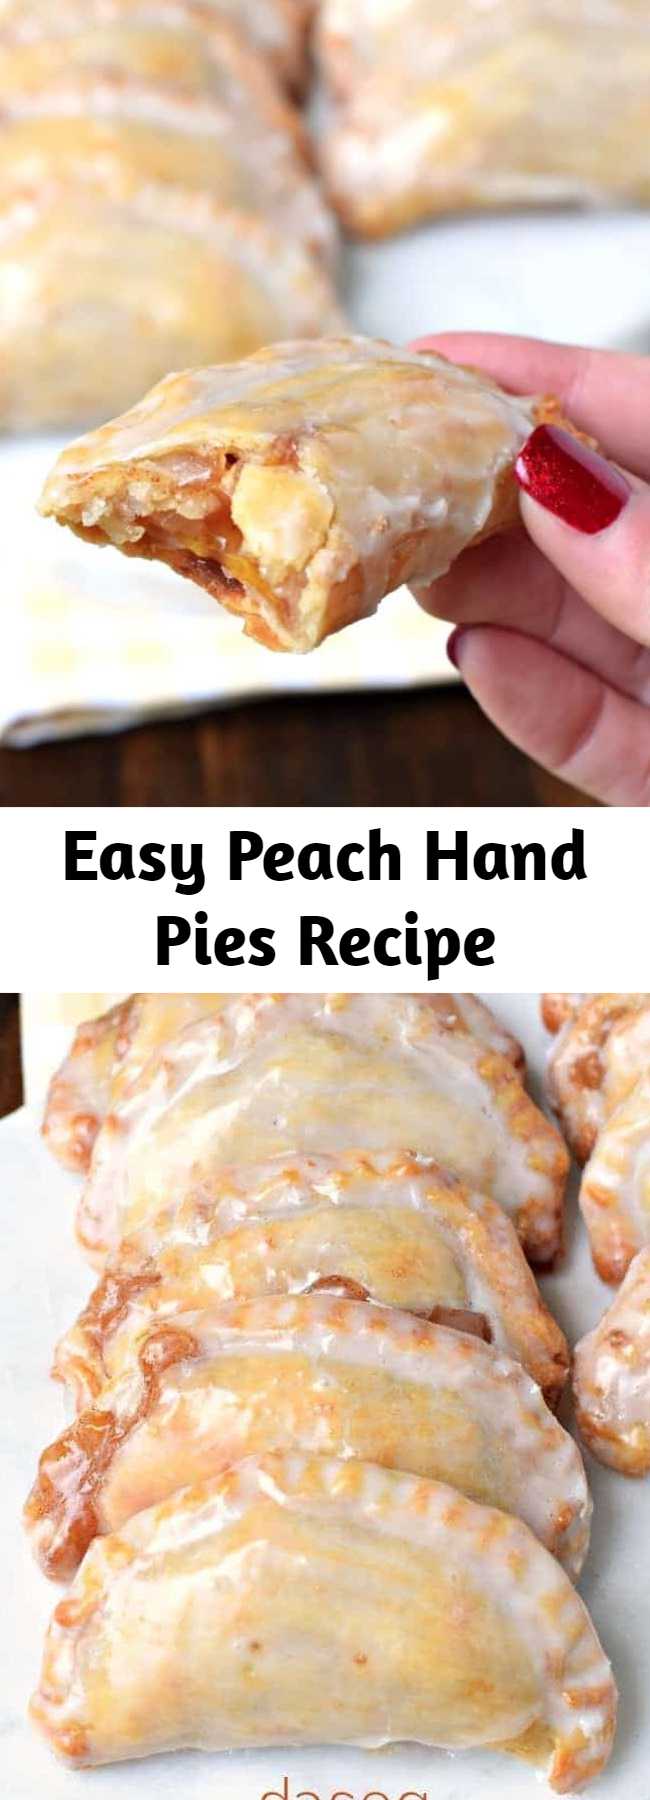 Easy Peach Hand Pies Recipe - Dessert is ready in 30 minutes with these Glazed Peach Hand Pies! The flaky crust and spicy cinnamon filling are the perfect combo in a hand pie, plus they're baked not fried! #handpies #piefilling #peach #dessert